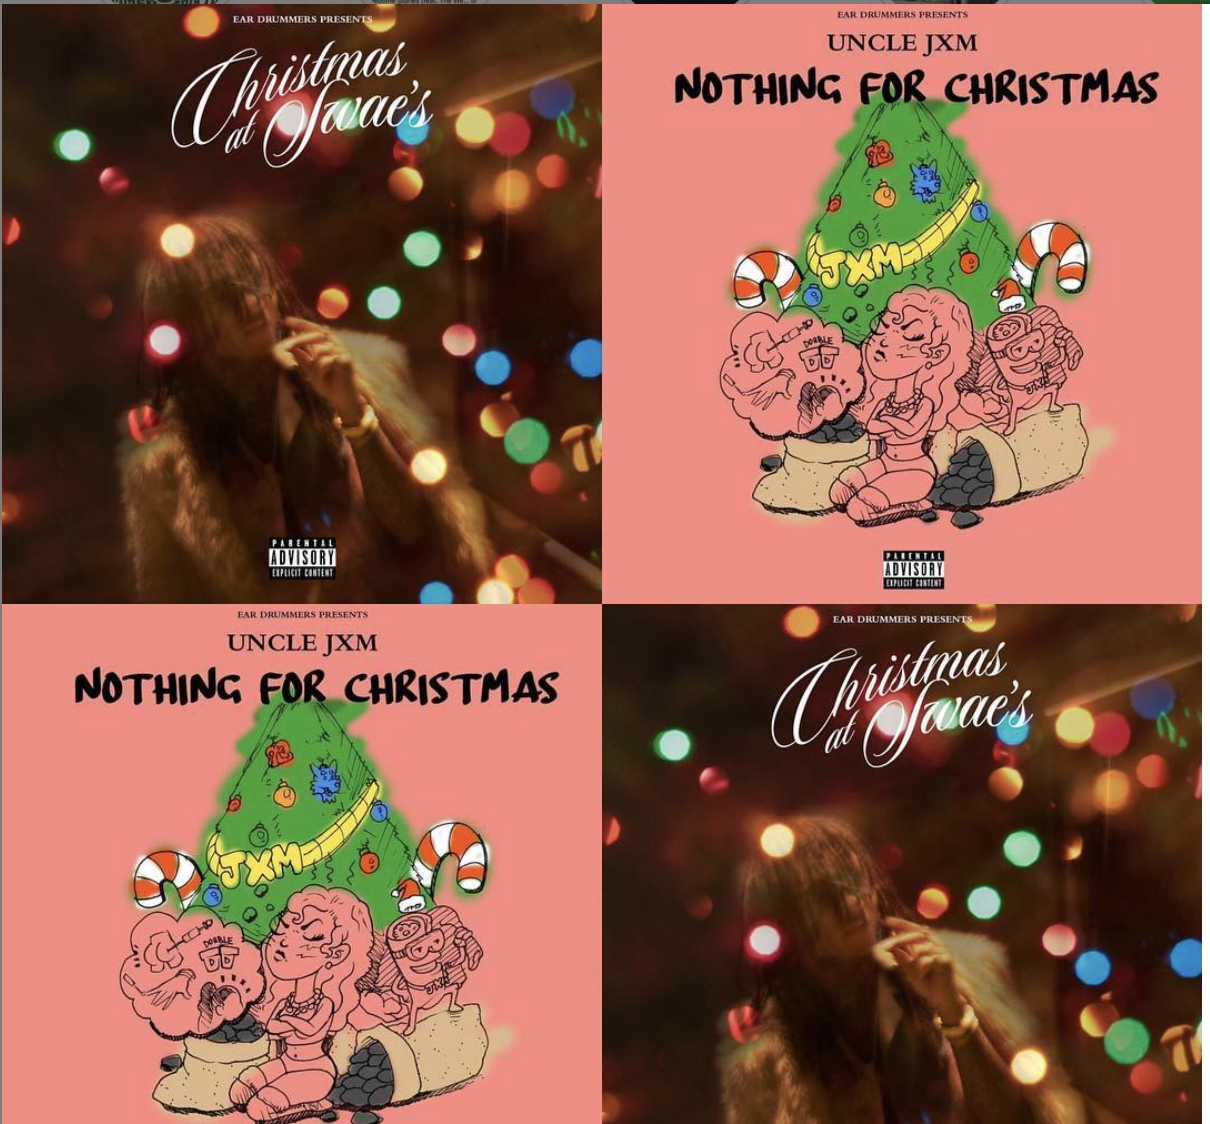 Rae Sremmurd Release Holiday Themed Music “Nothing For Christmas” & “Christmas at Swaes”  [STREAM]